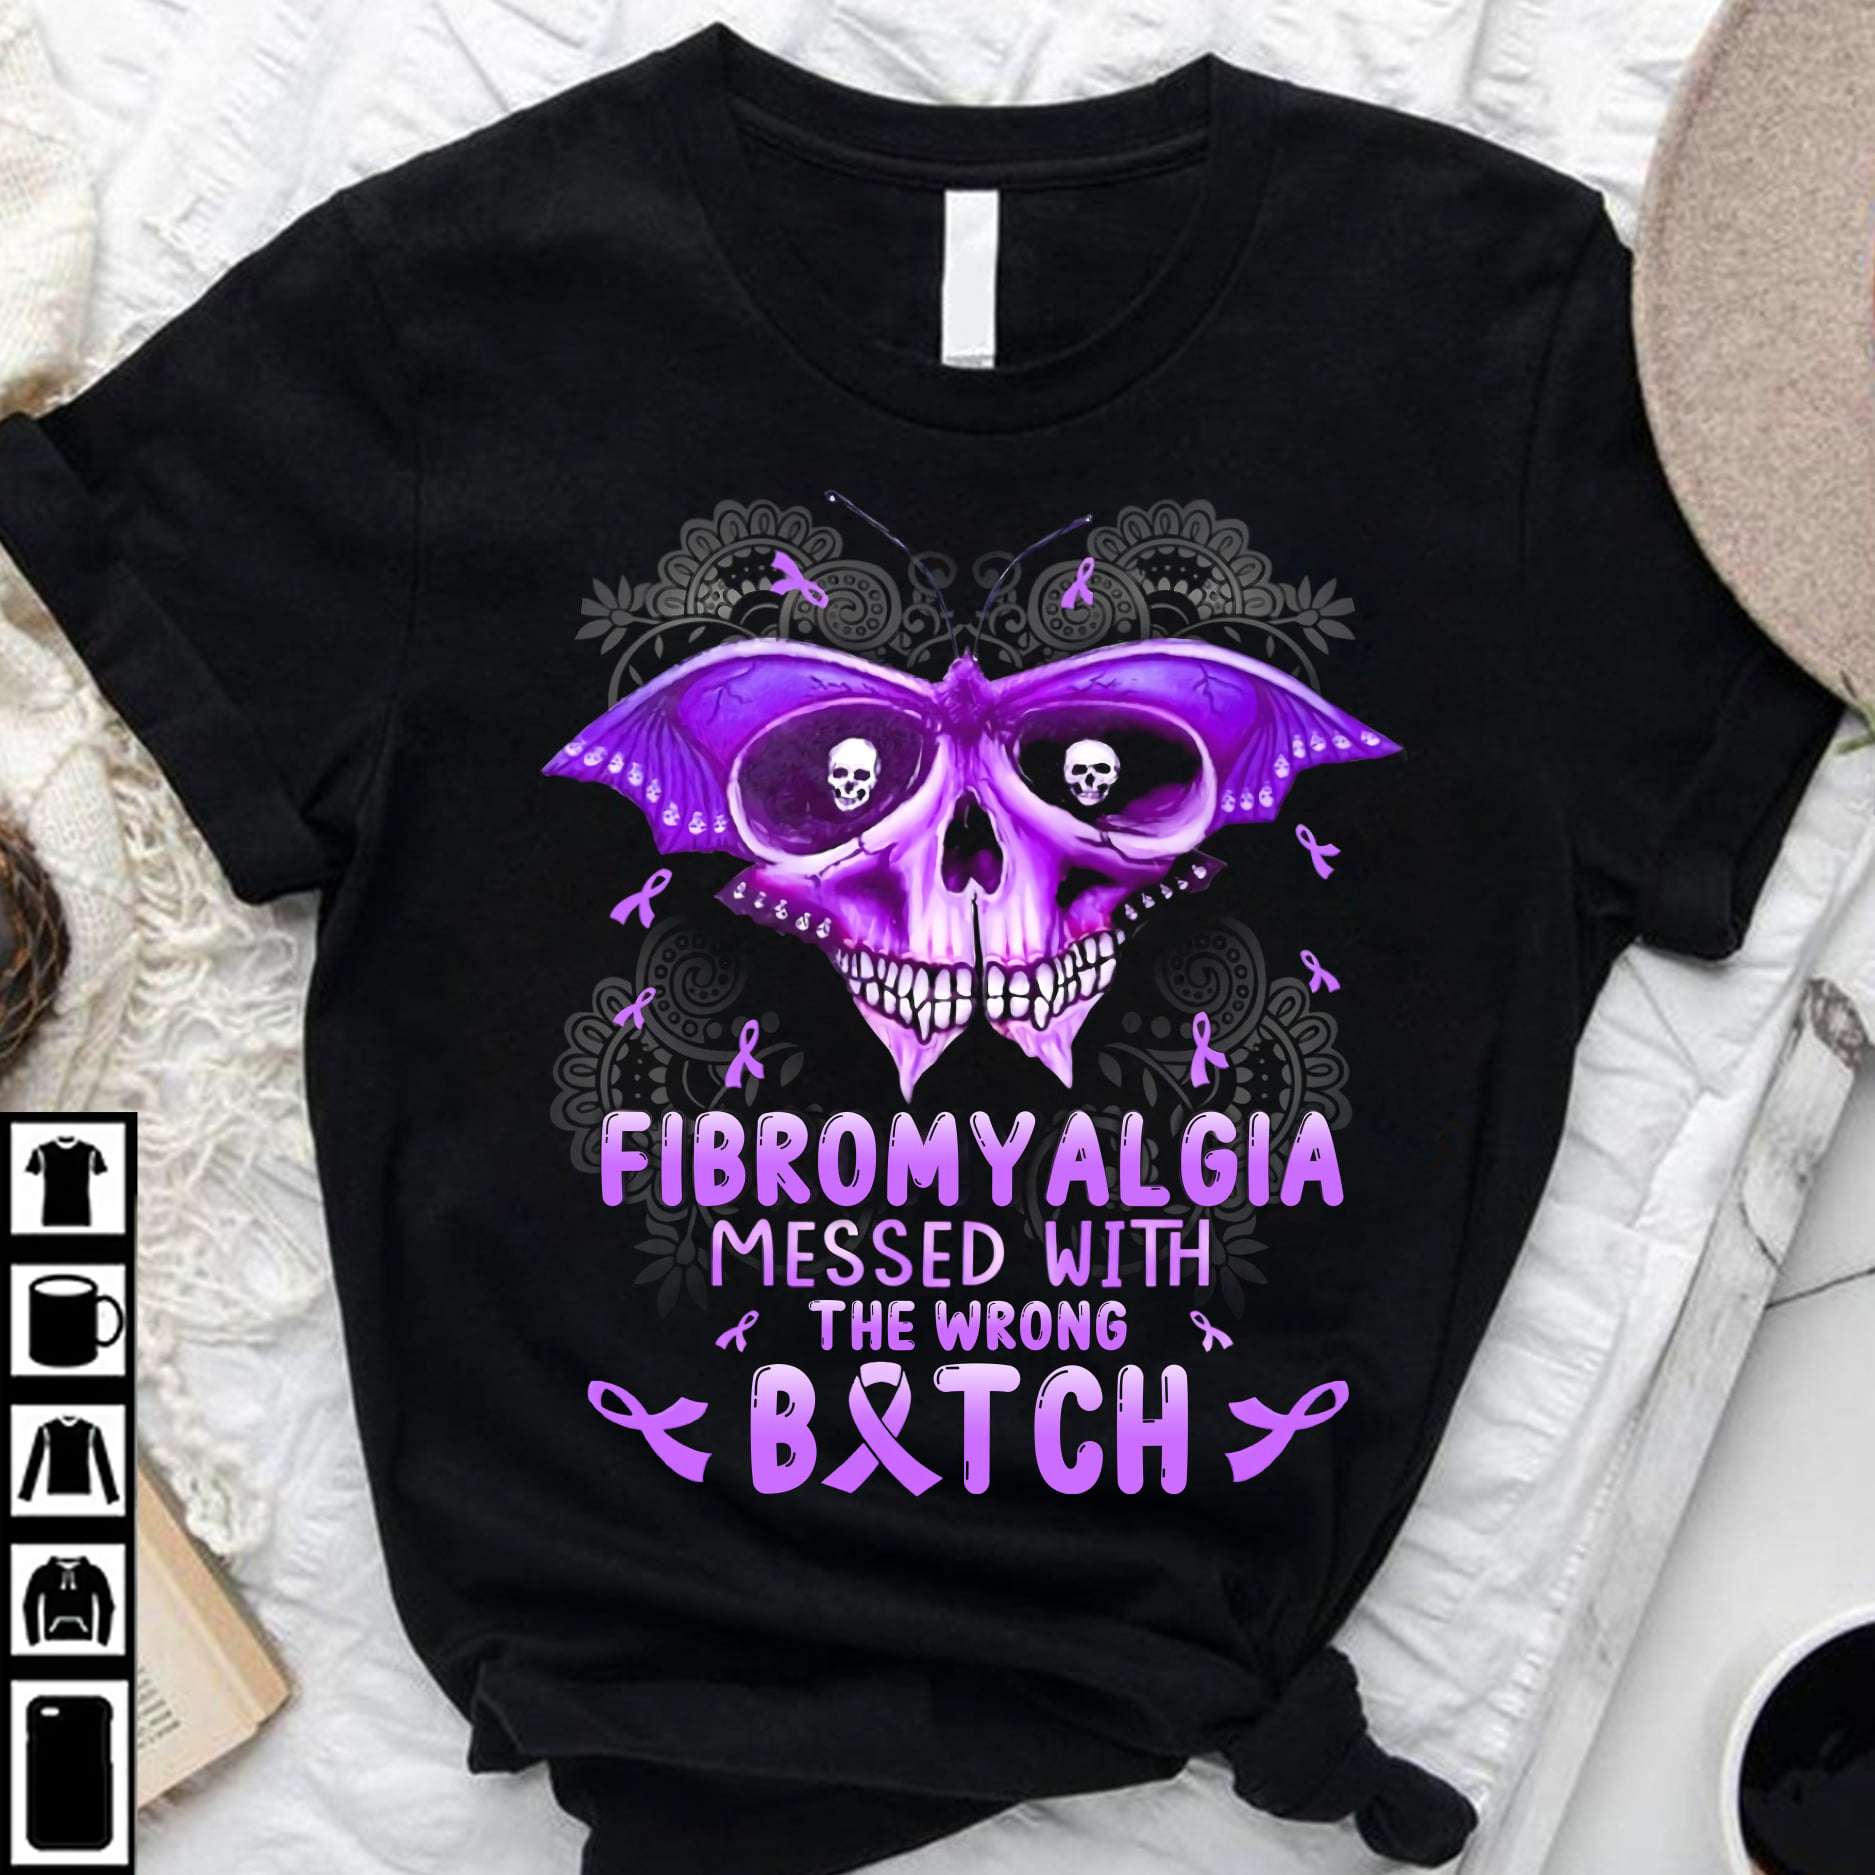 Fibromyalgia messed with the wrong bitch - Evil skull butterfly, Fibromyalgia awareness